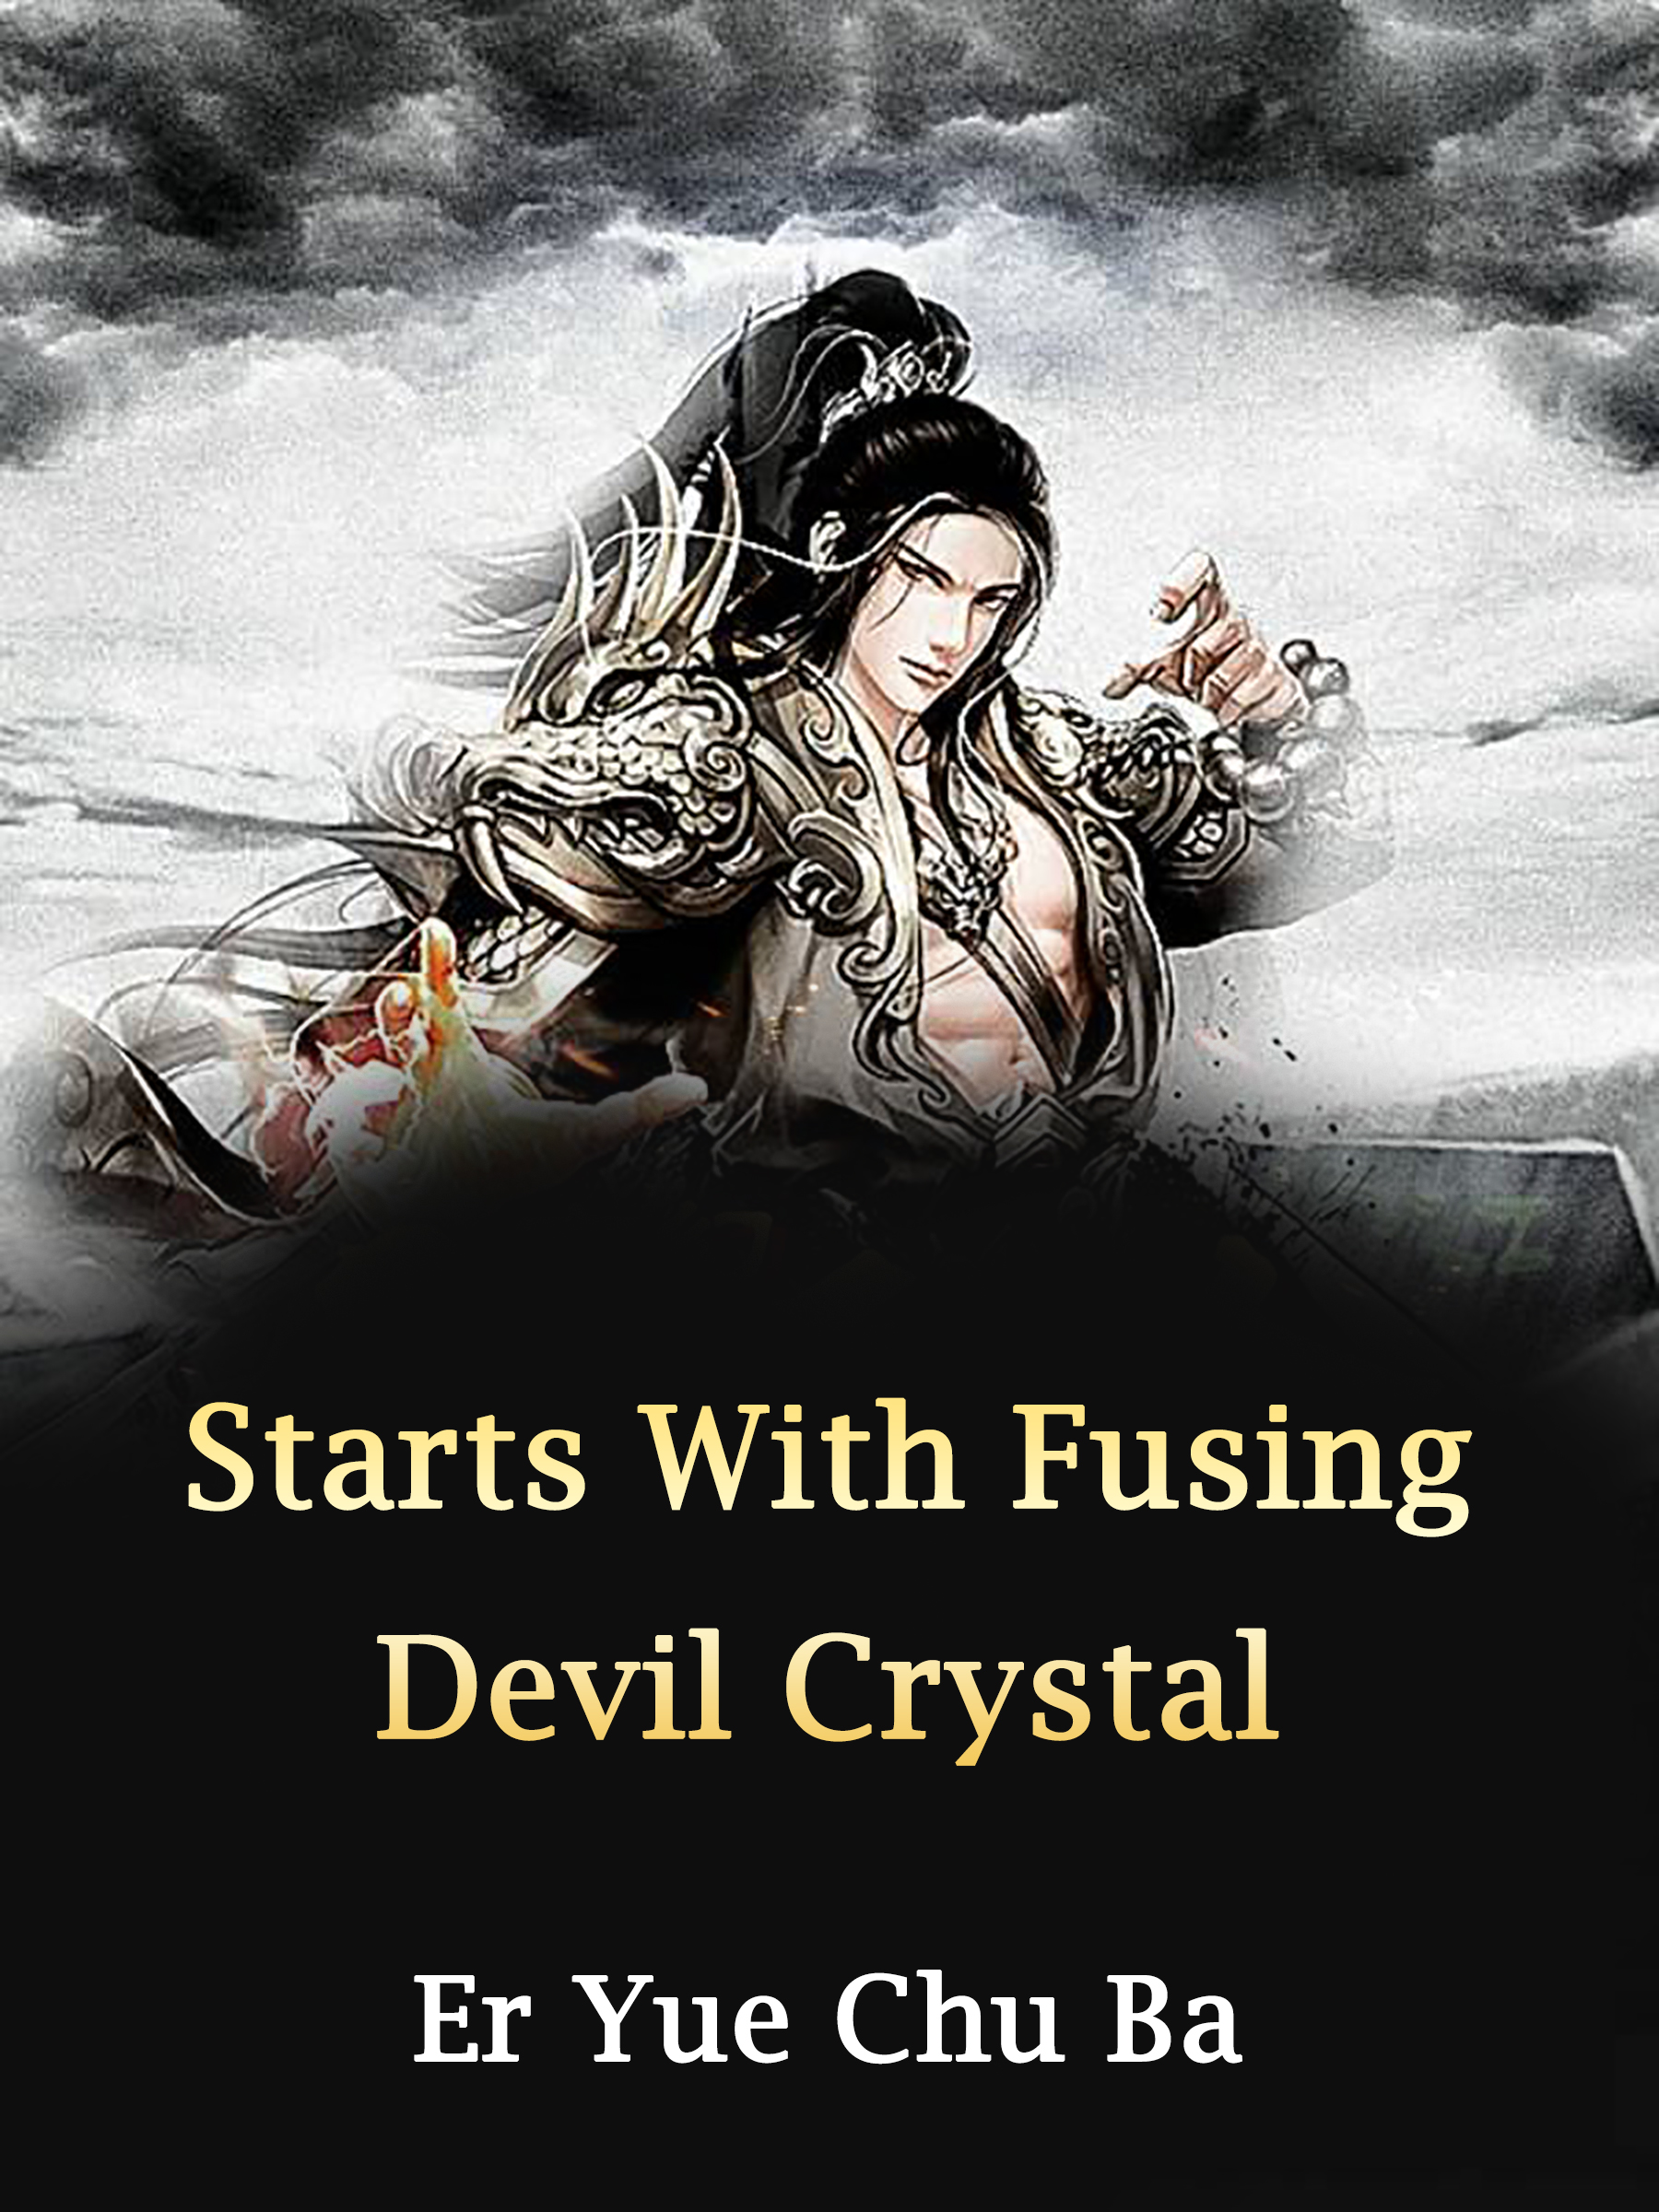 Starts With Fusing Devil Crystal